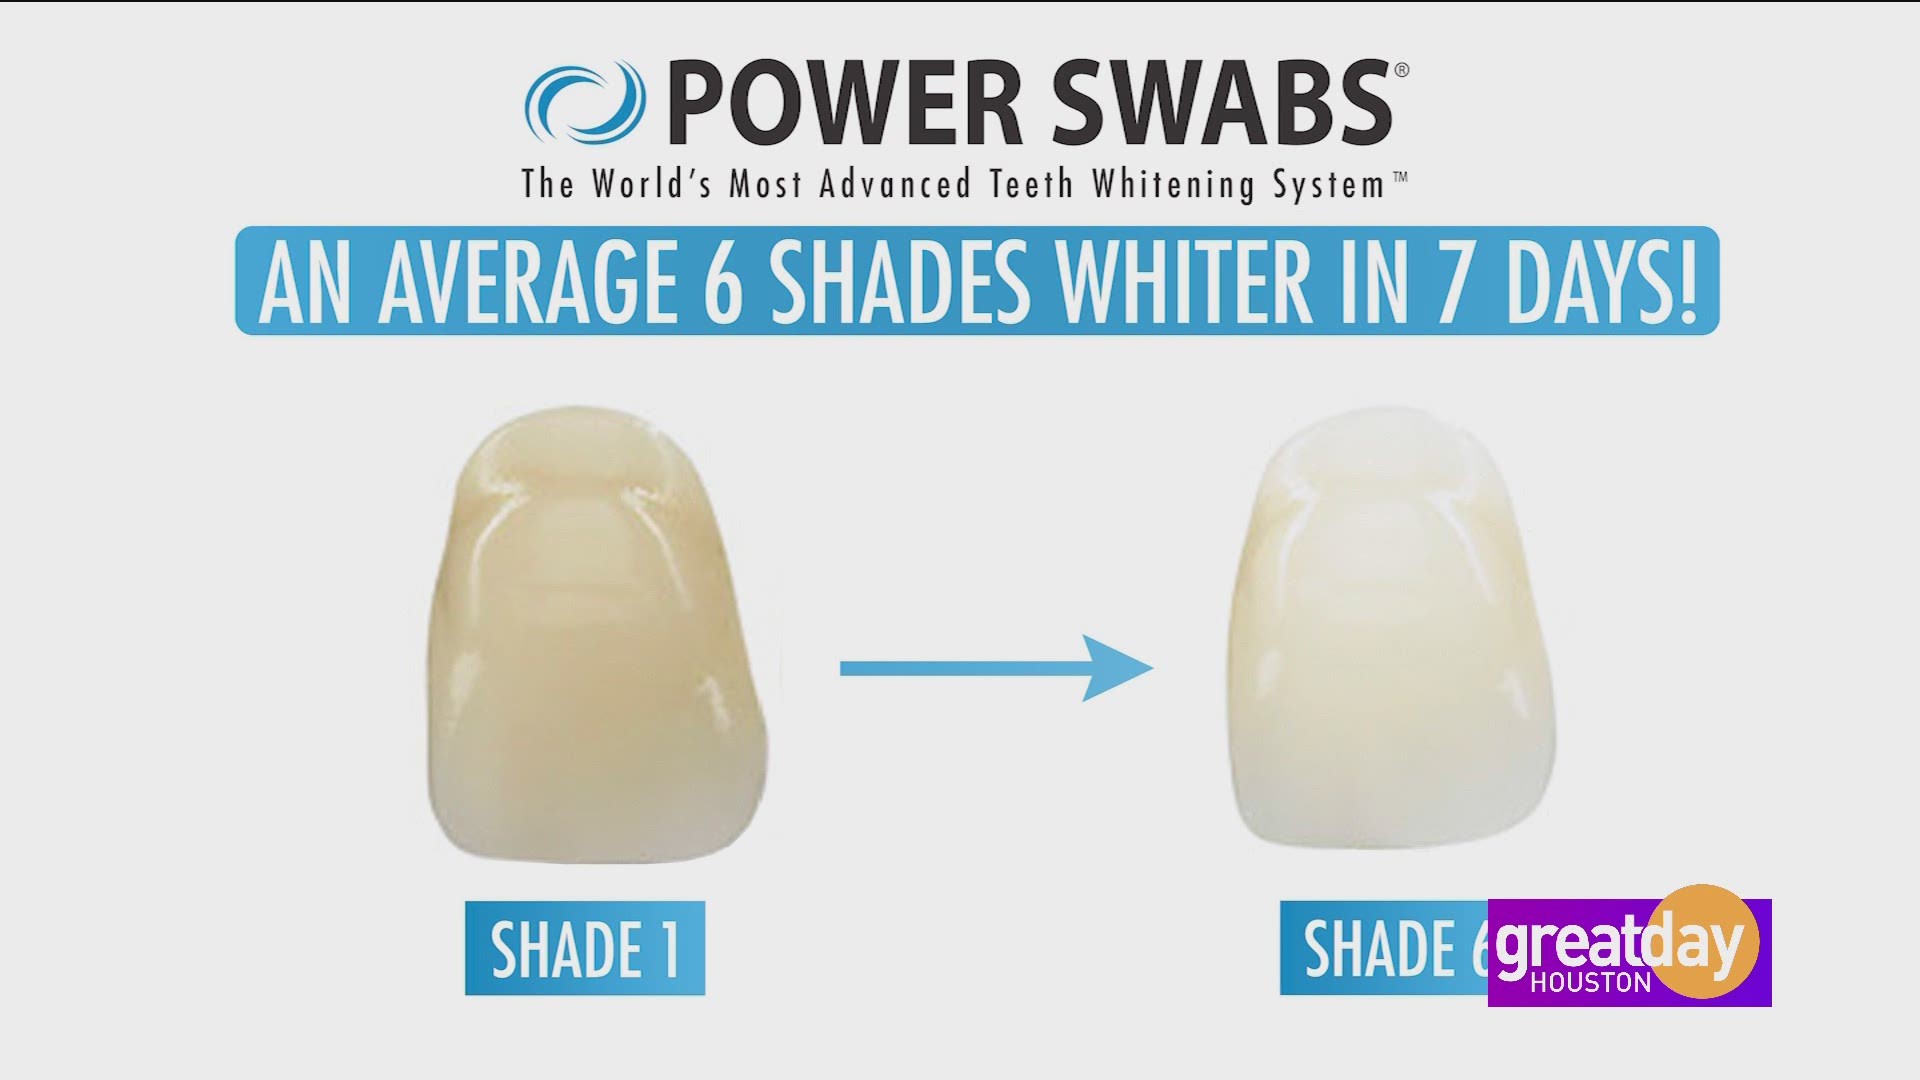 Power Swabs is the world's most advanced teeth whitening system. Scott DeFalco shows us how it can transform your smile in just minutes.